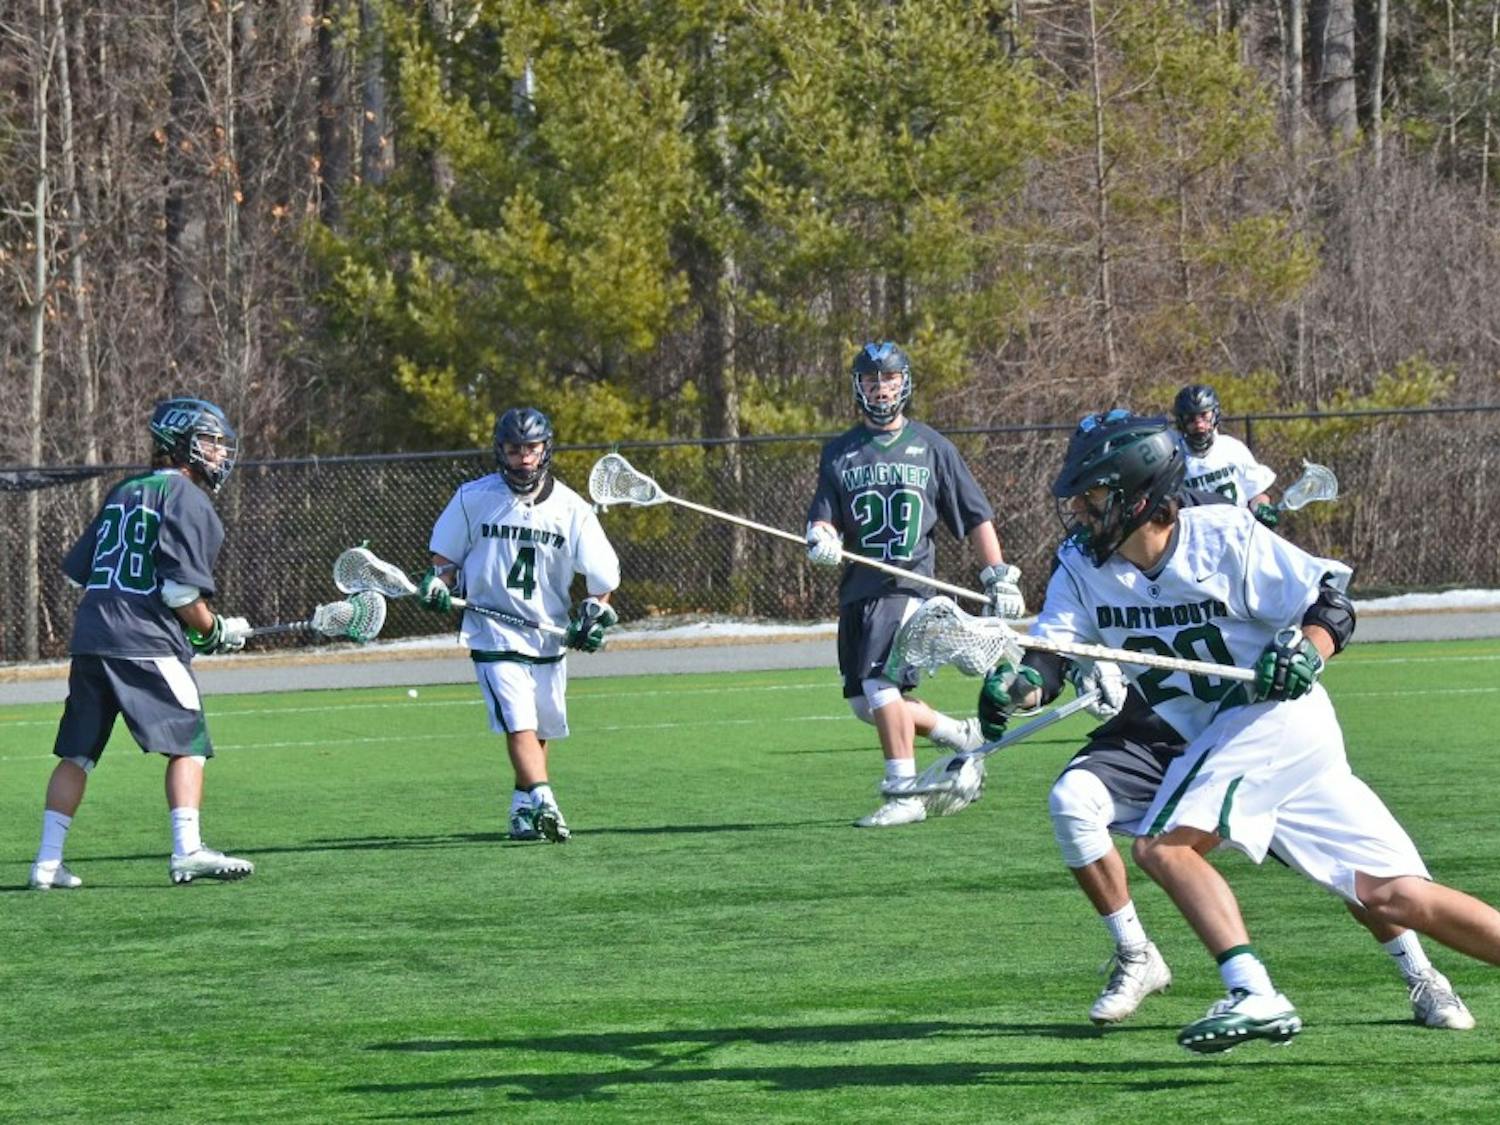 Men's lacrosse lost in a close game to Wagner.